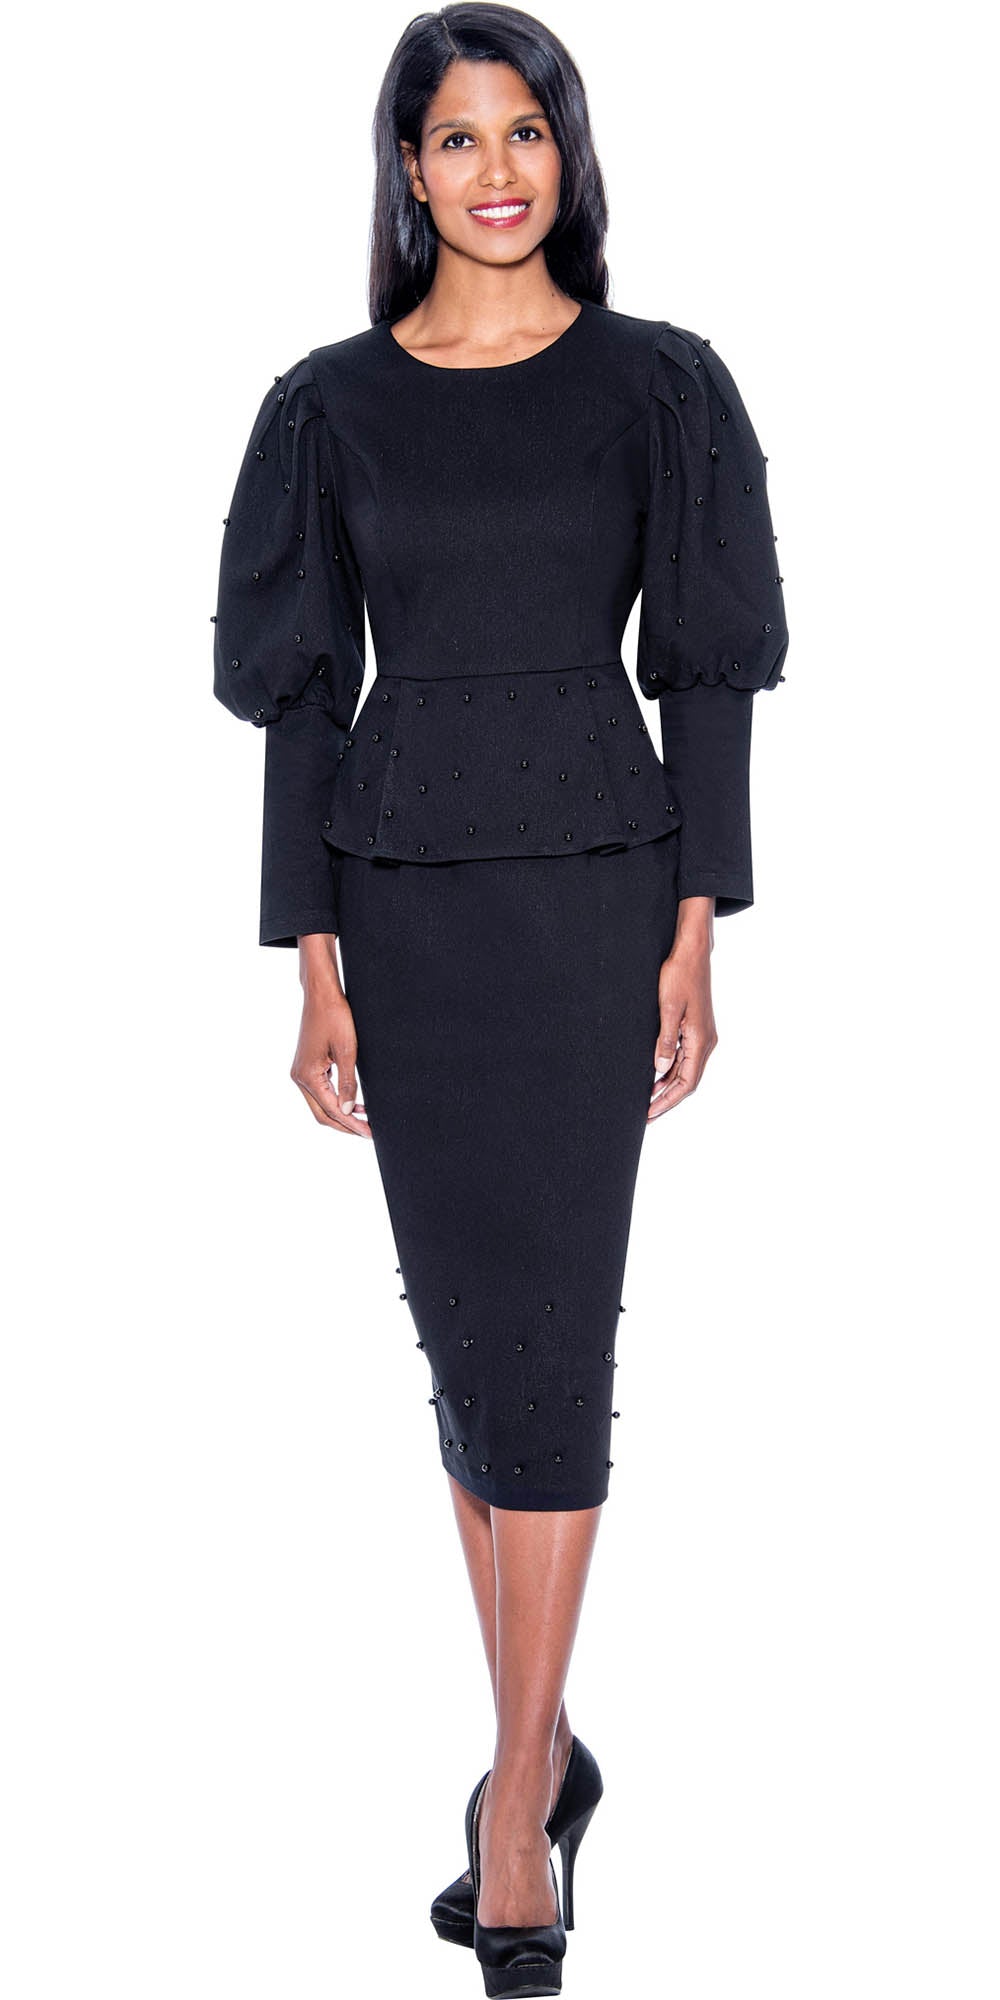 Devine Sport DS63682 - Soft Stretch Denim Skirt Suit With Black Pearling